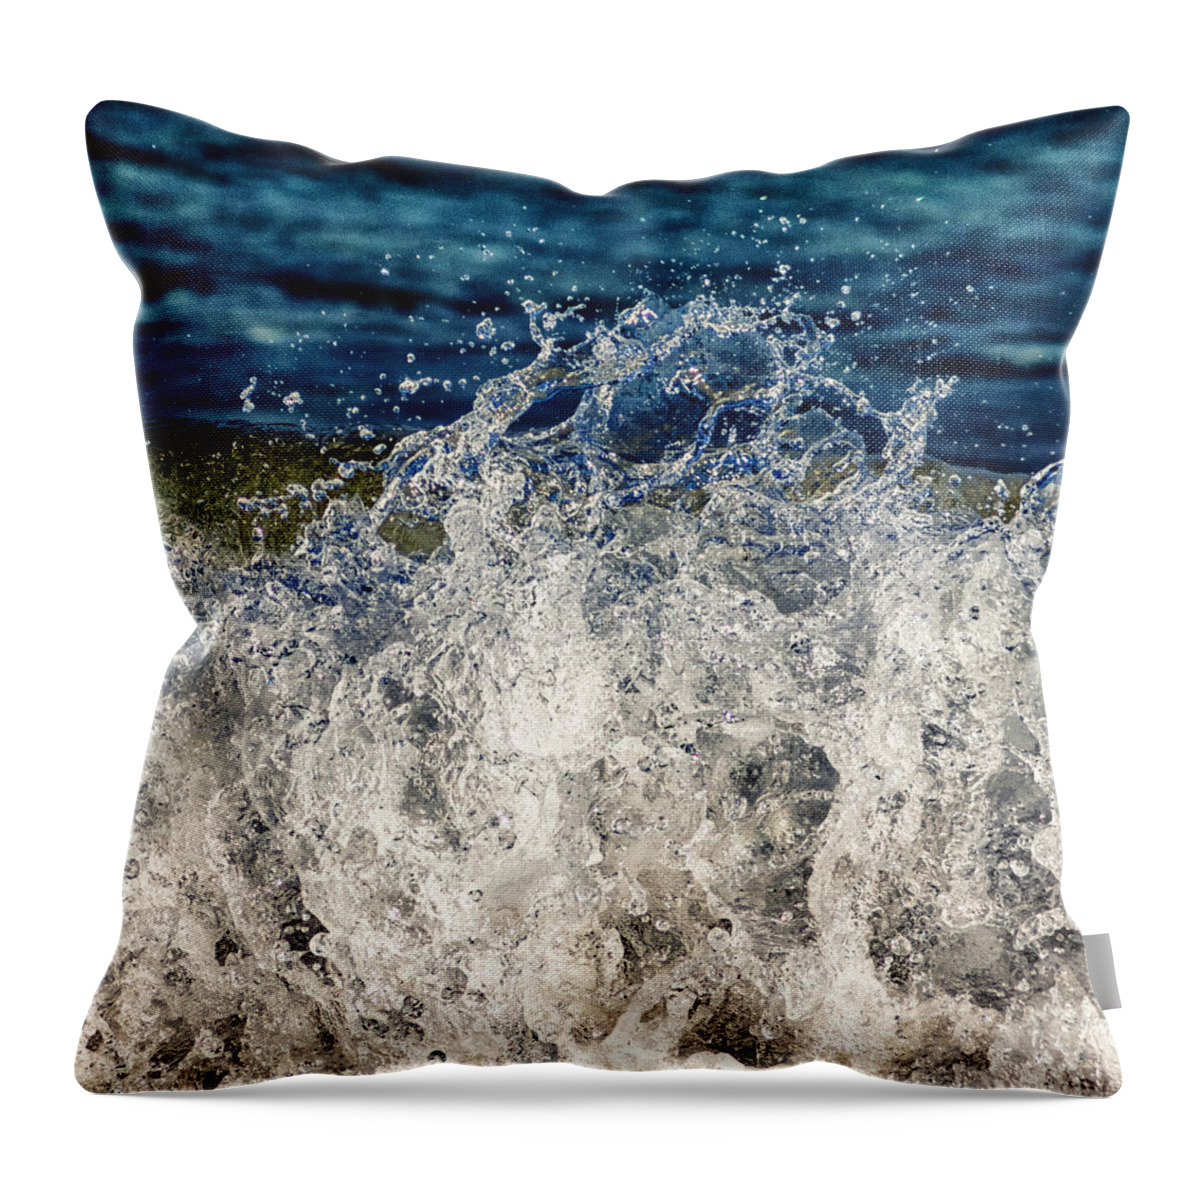 Water Throw Pillow featuring the photograph Wave4 by Stelios Kleanthous